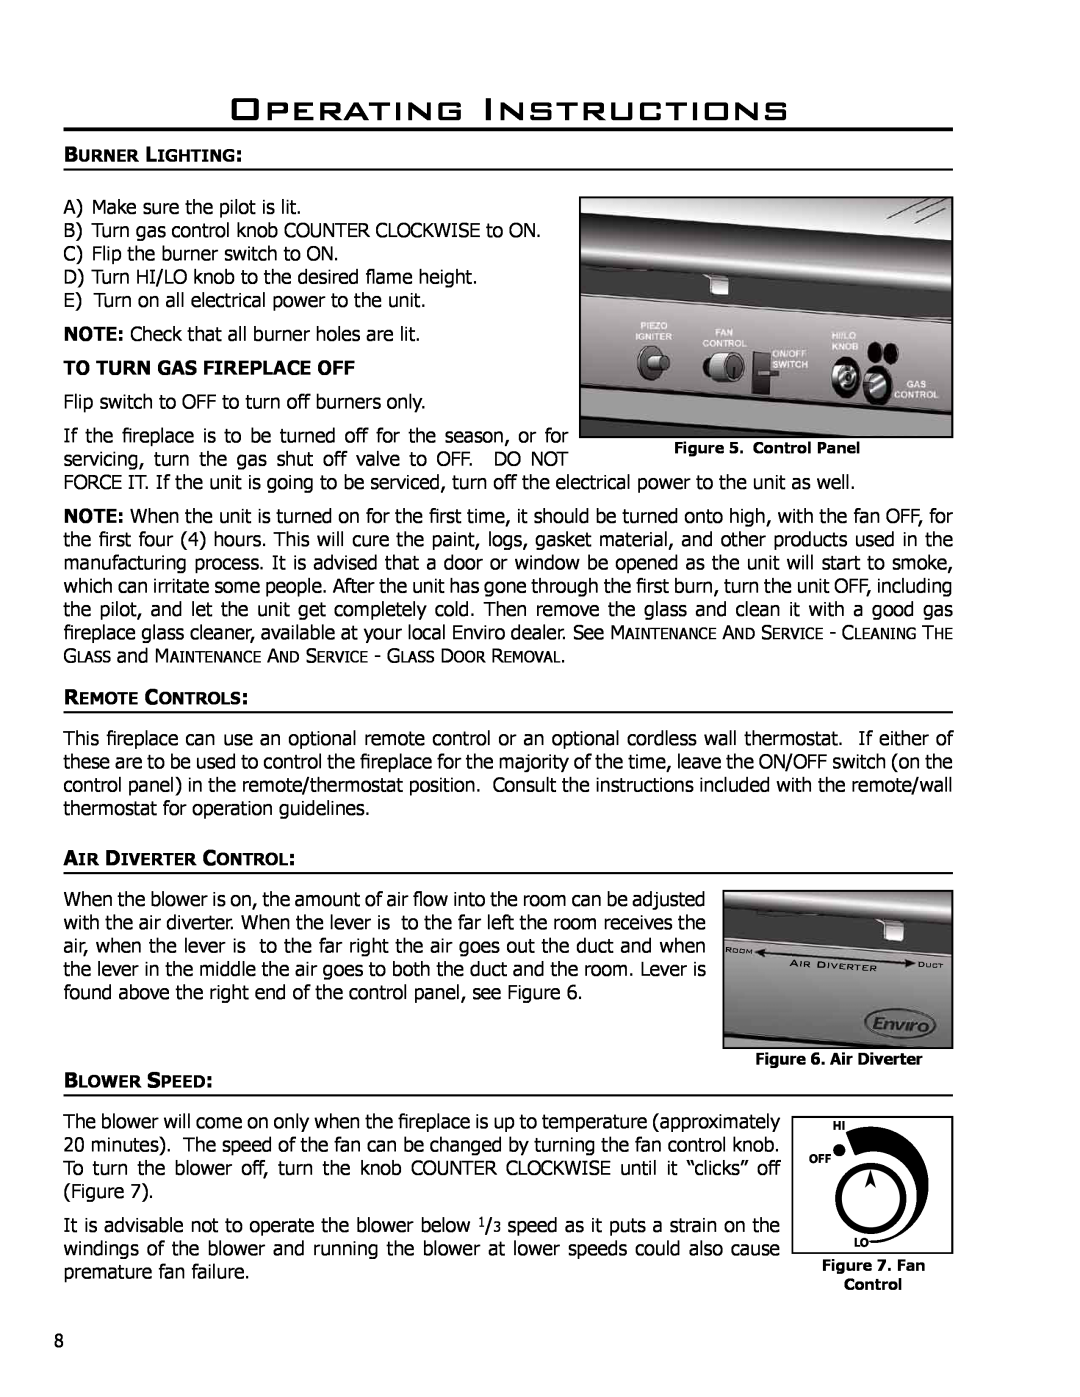 Enviro DV50DX owner manual Operating Instructions, To Turn Gas Fireplace Off 